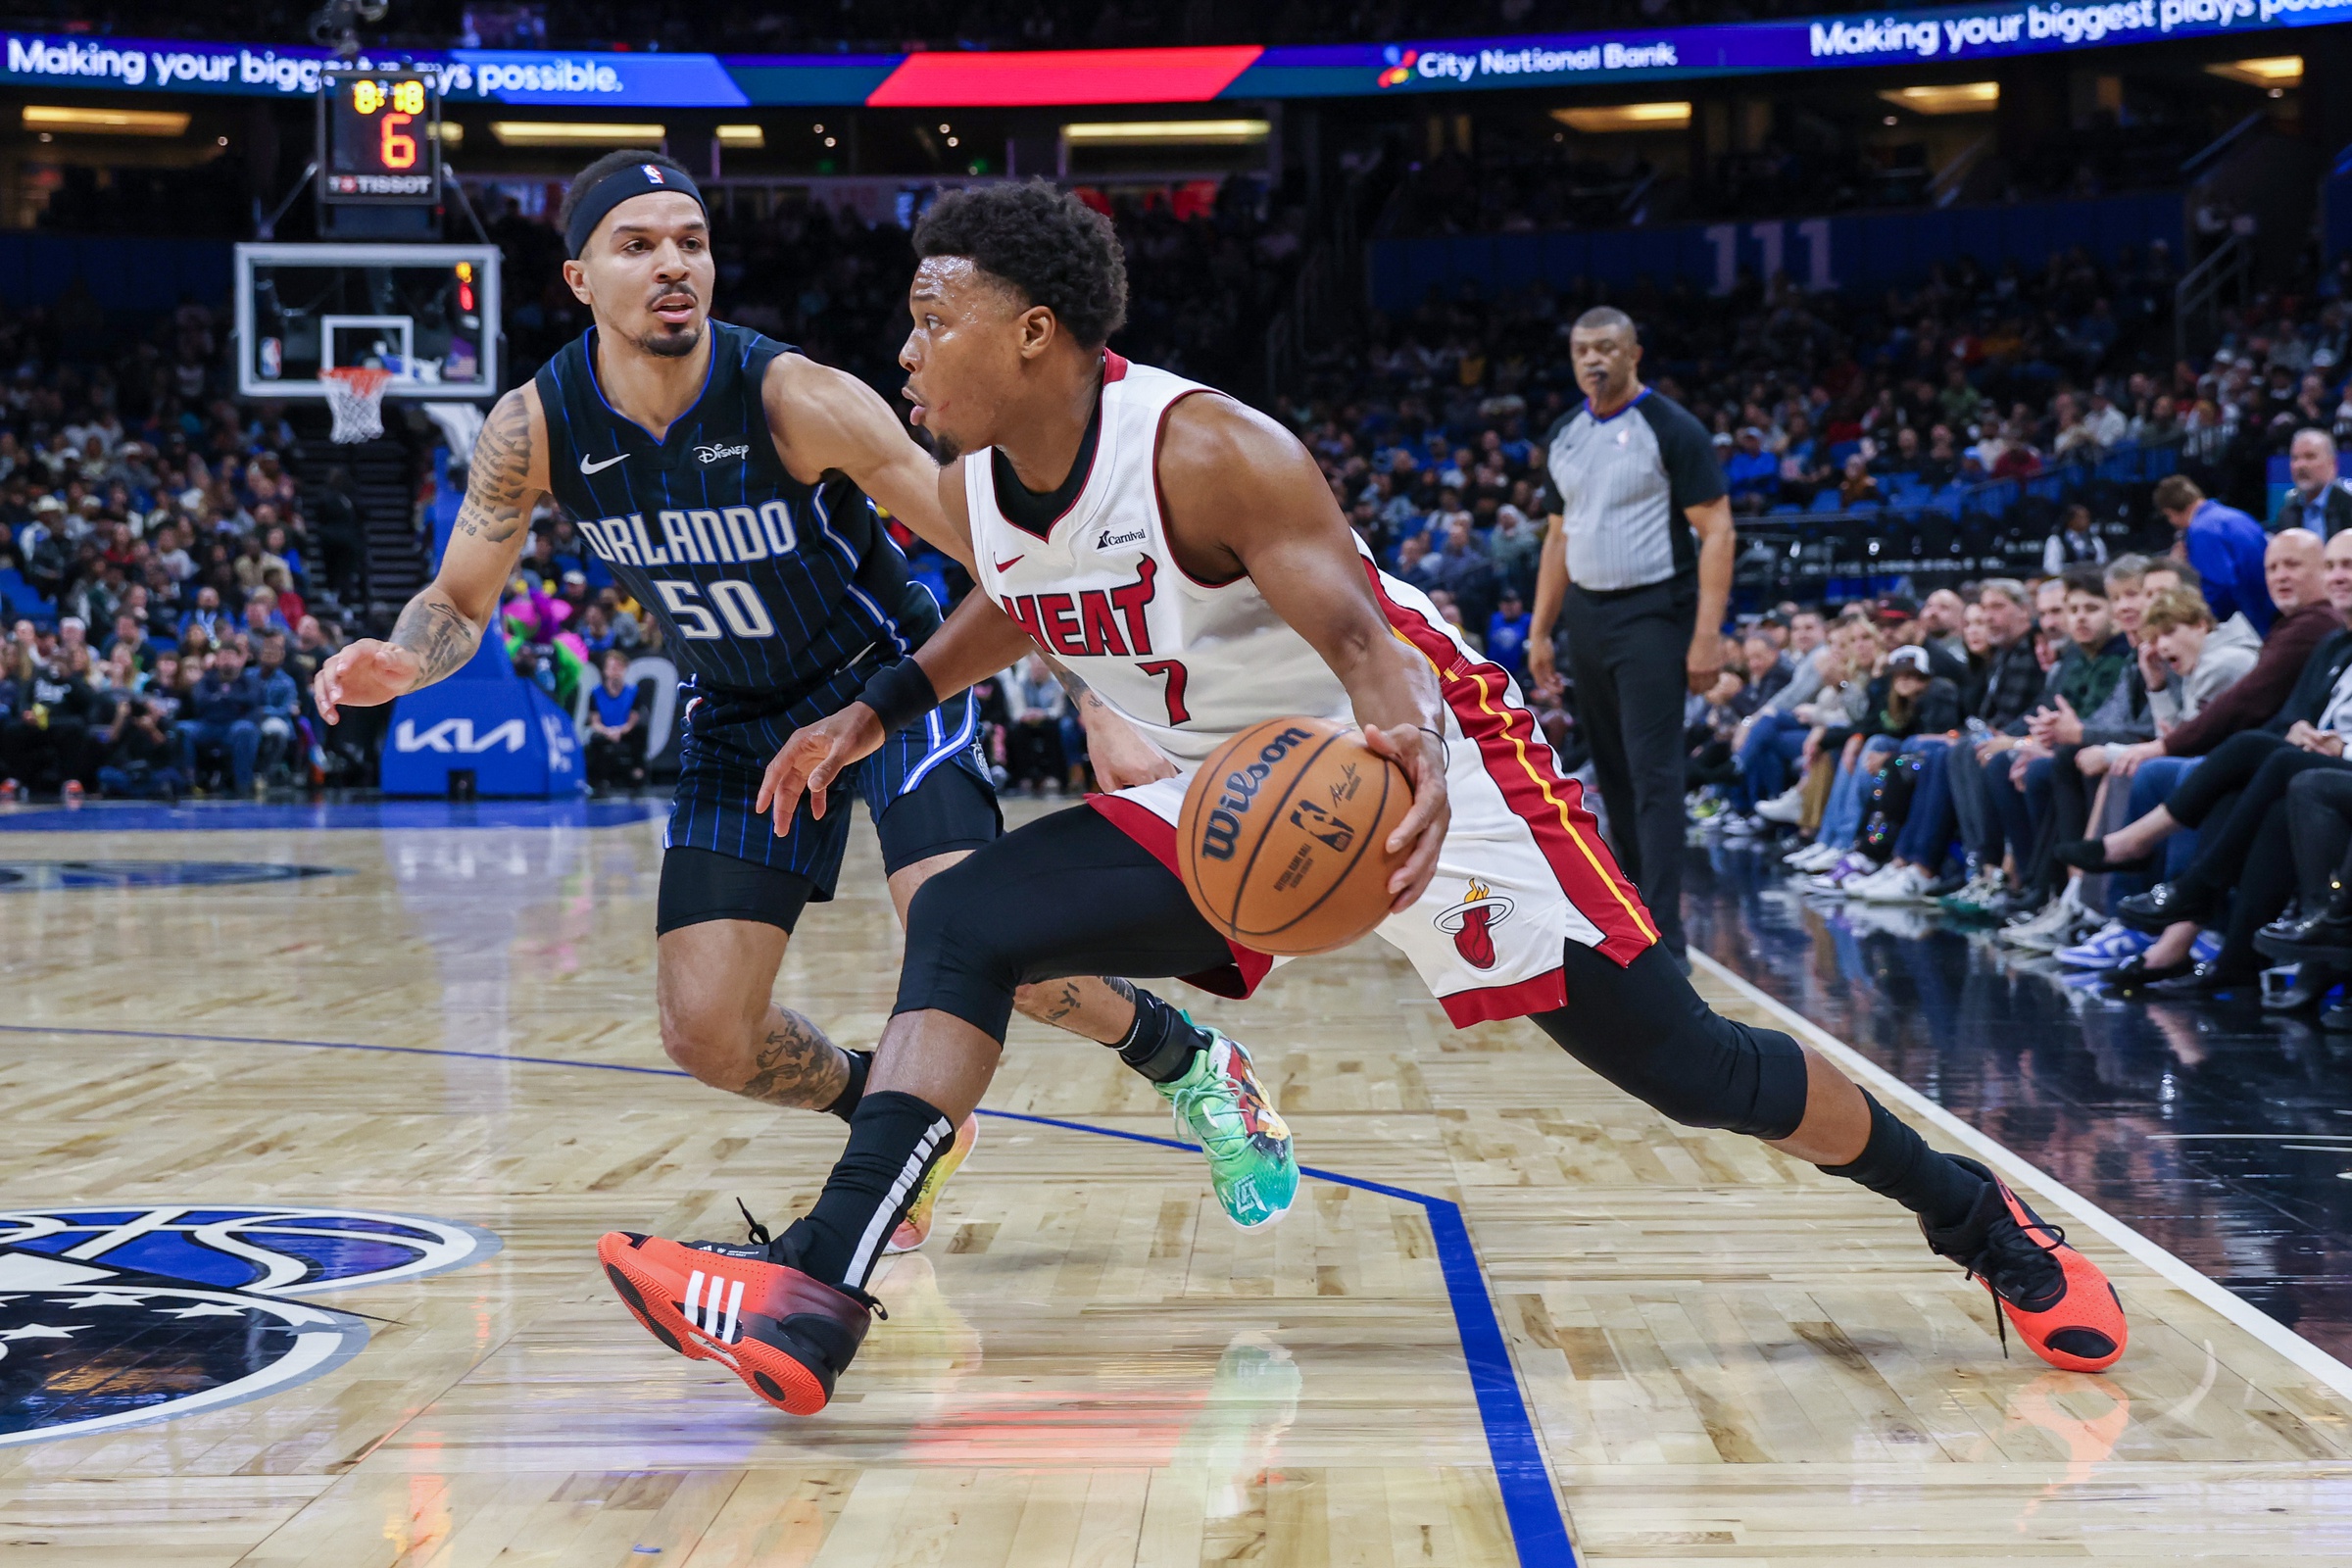 Miami Heat guard Kyle Lowry (7) drives around Orlando Magic guard Cole Anthony (50) during the second quarter at Amway Center.